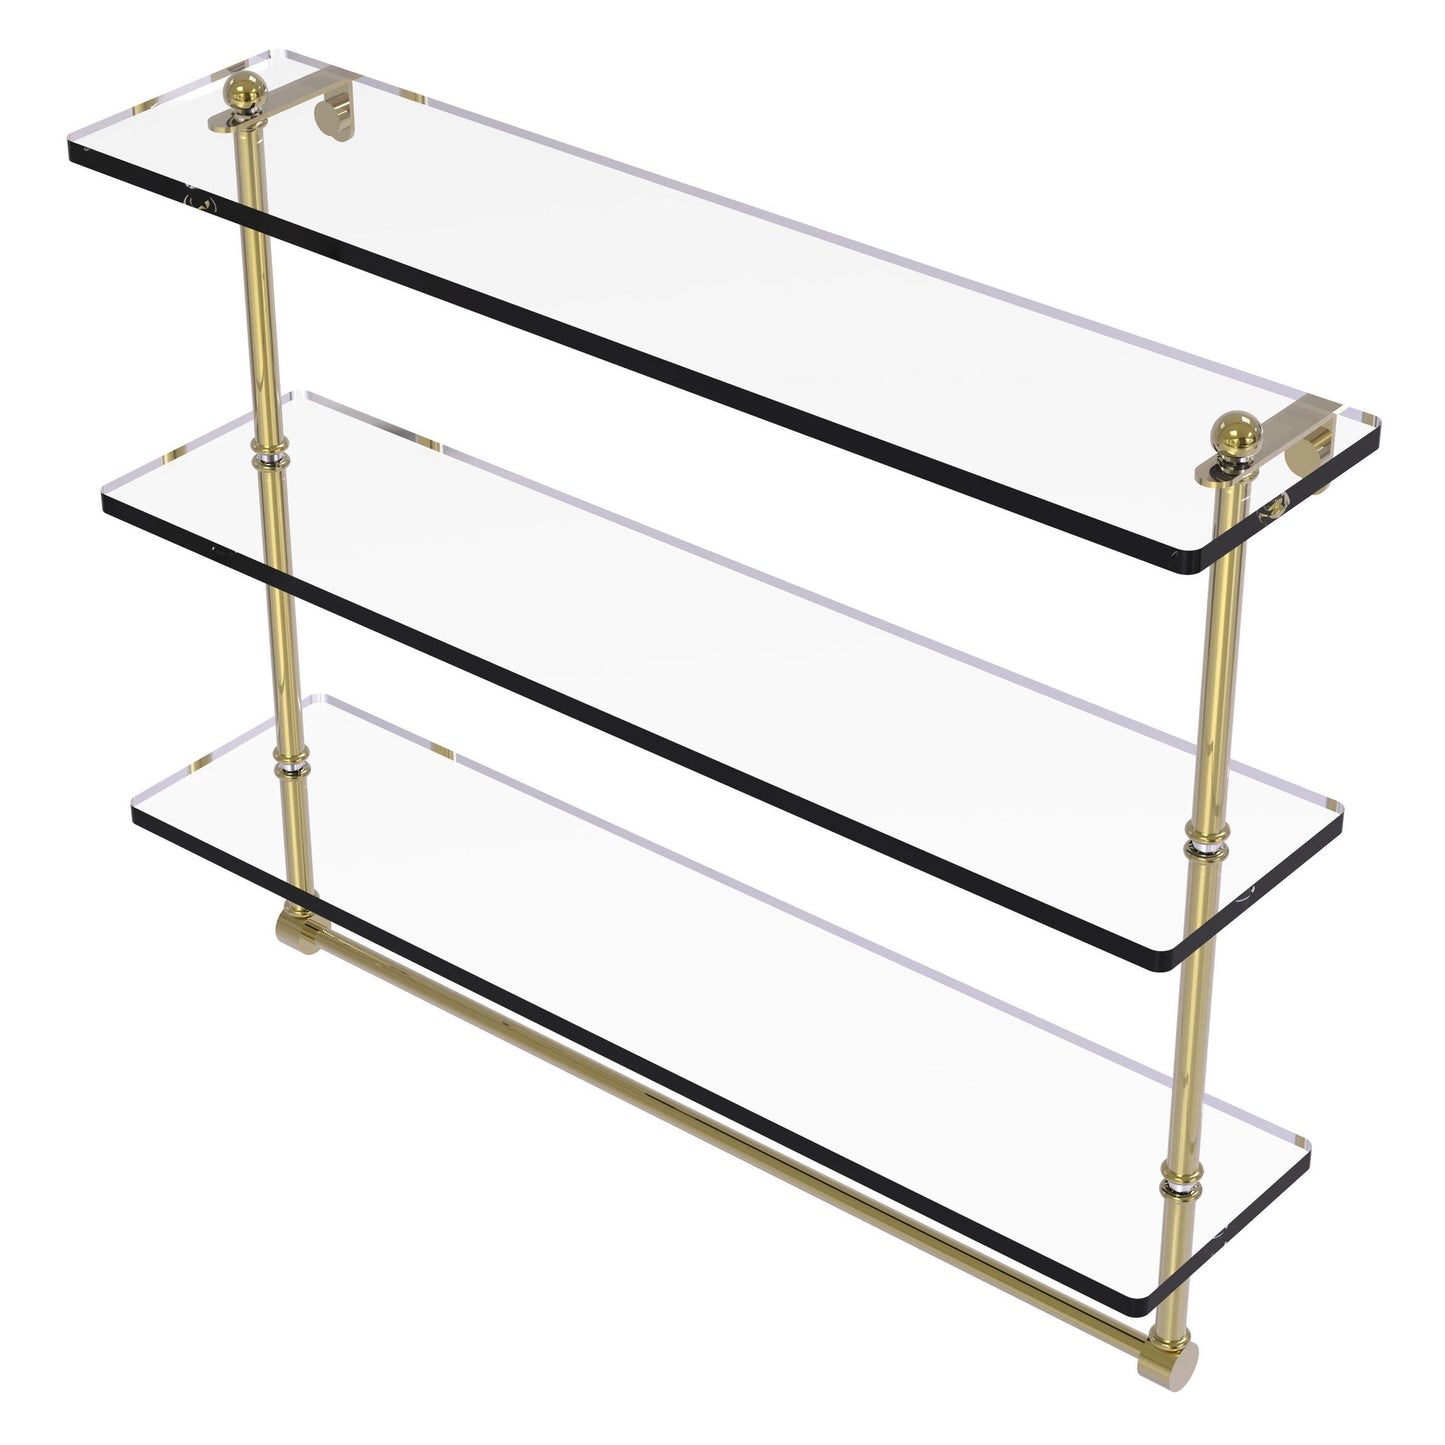 Allied Brass Prestige Regal 22" x 5" Unlacquered Brass Solid Brass 22-Inch Triple Tiered Glass Shelf With Integrated Towel Bar